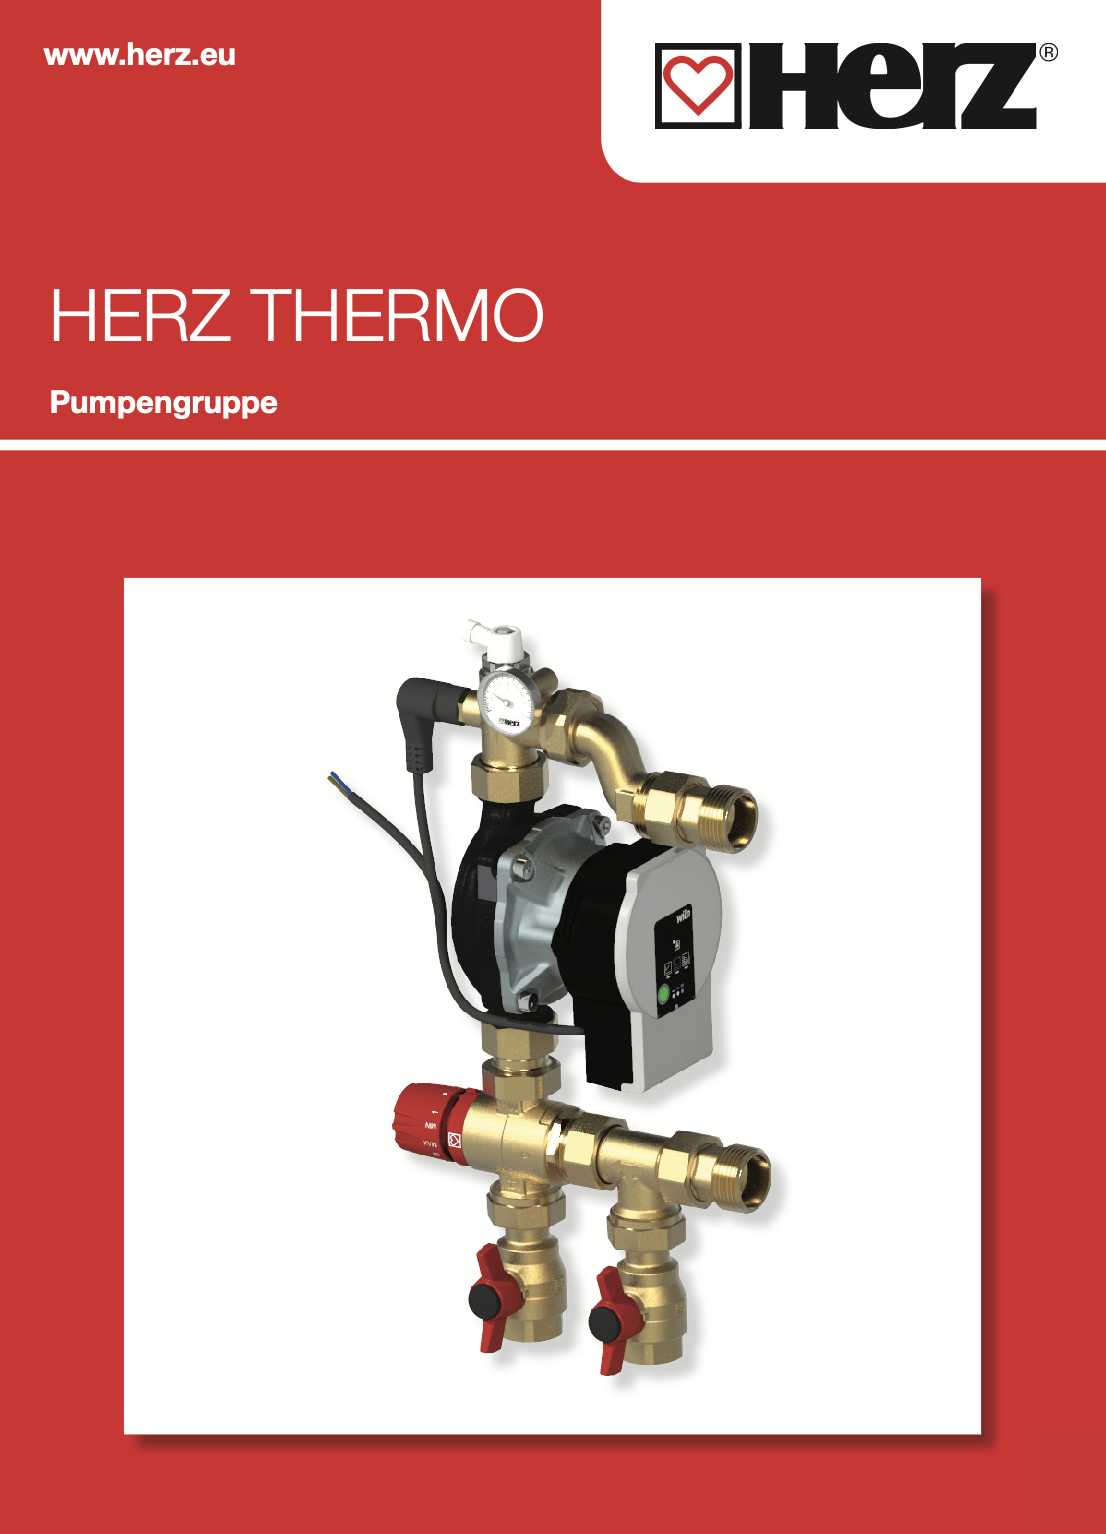 HERZ THERMO